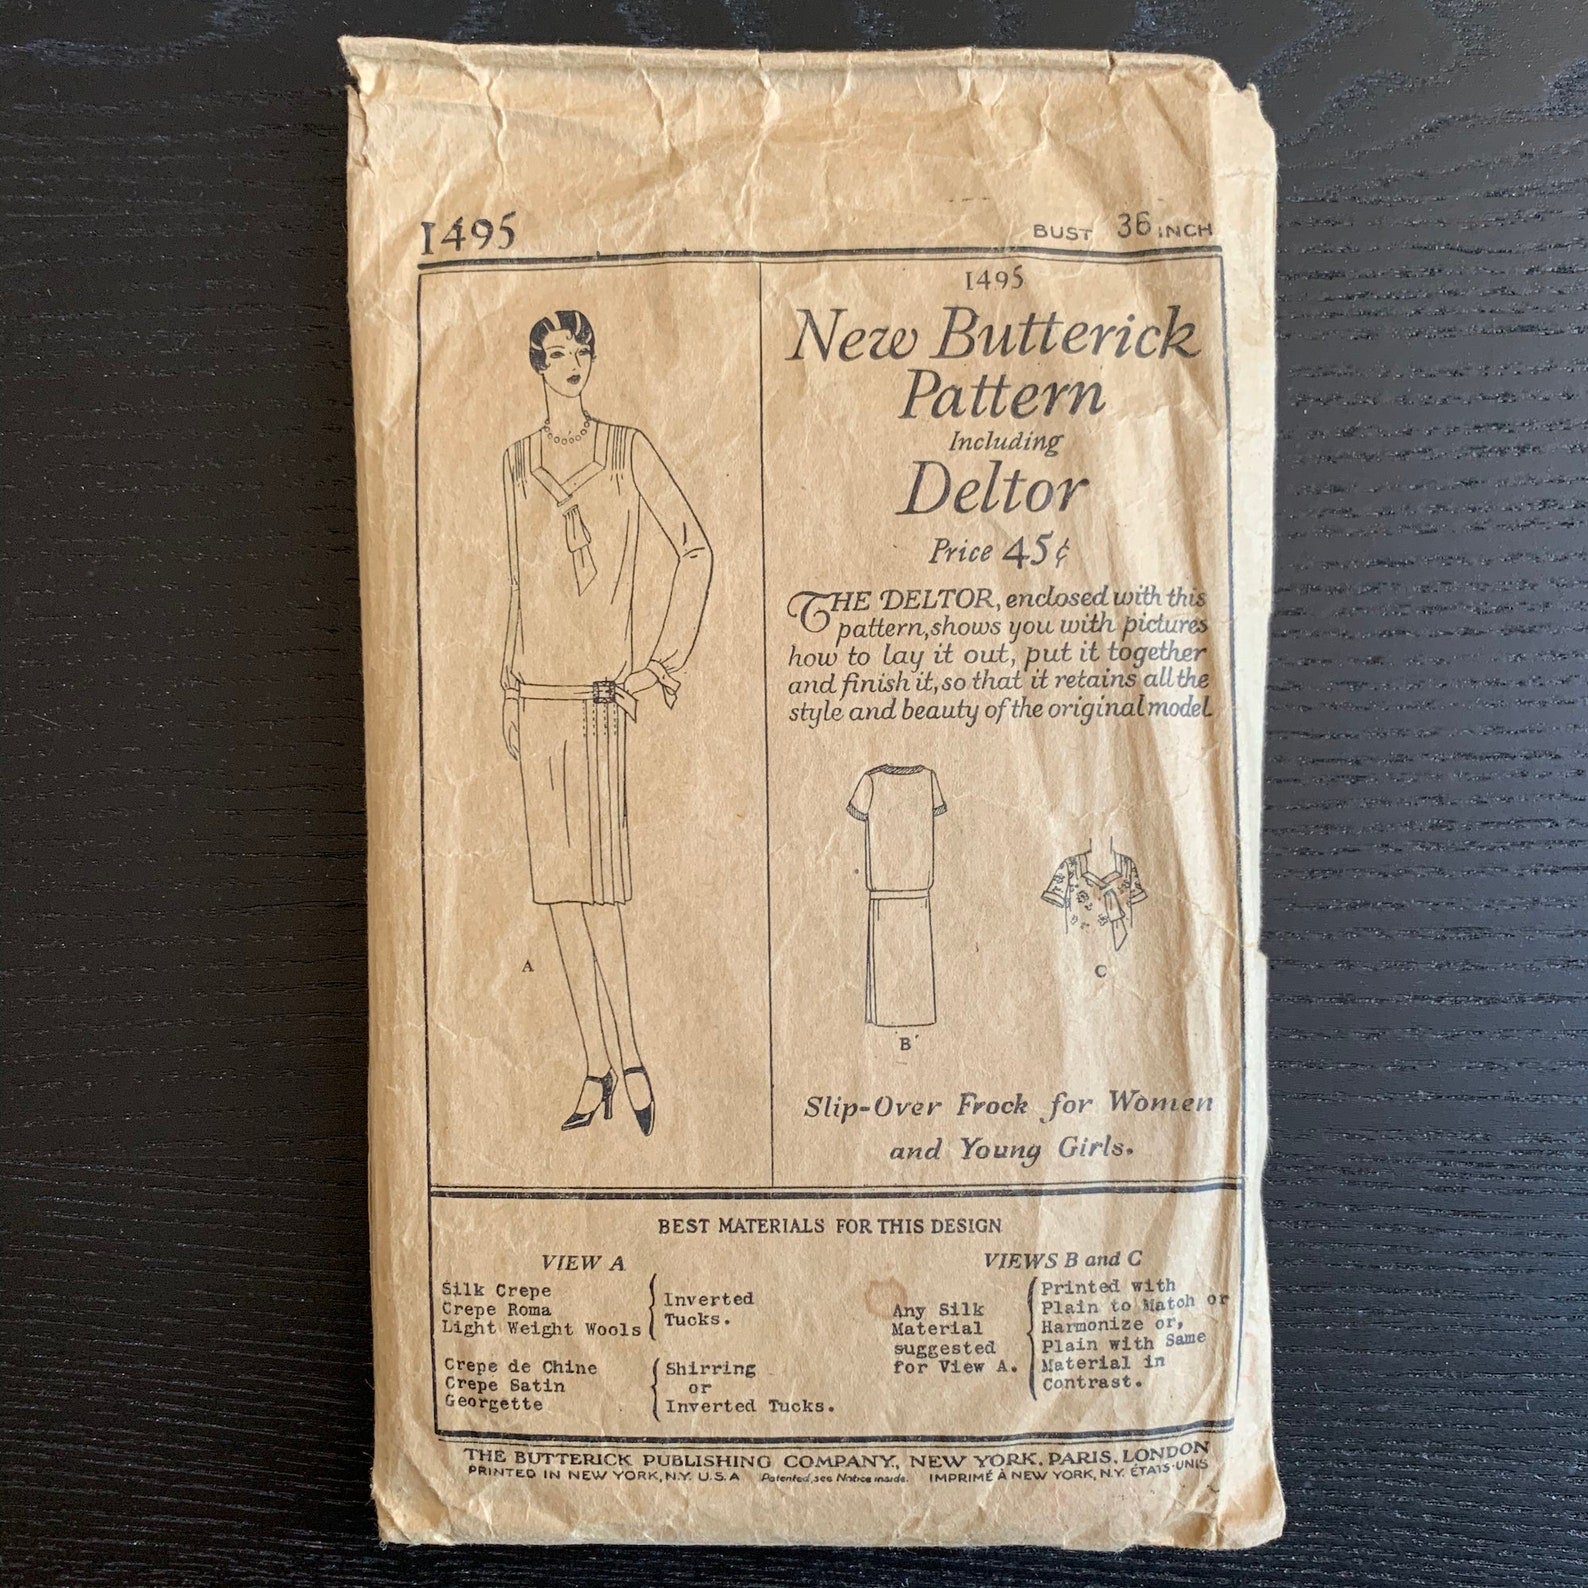 VINTAGE 1920s Butterick Deltor Sewing Pattern 1495 Slip-over Dress for Women and Young Girls, Size 36" Bust, 38" Hip